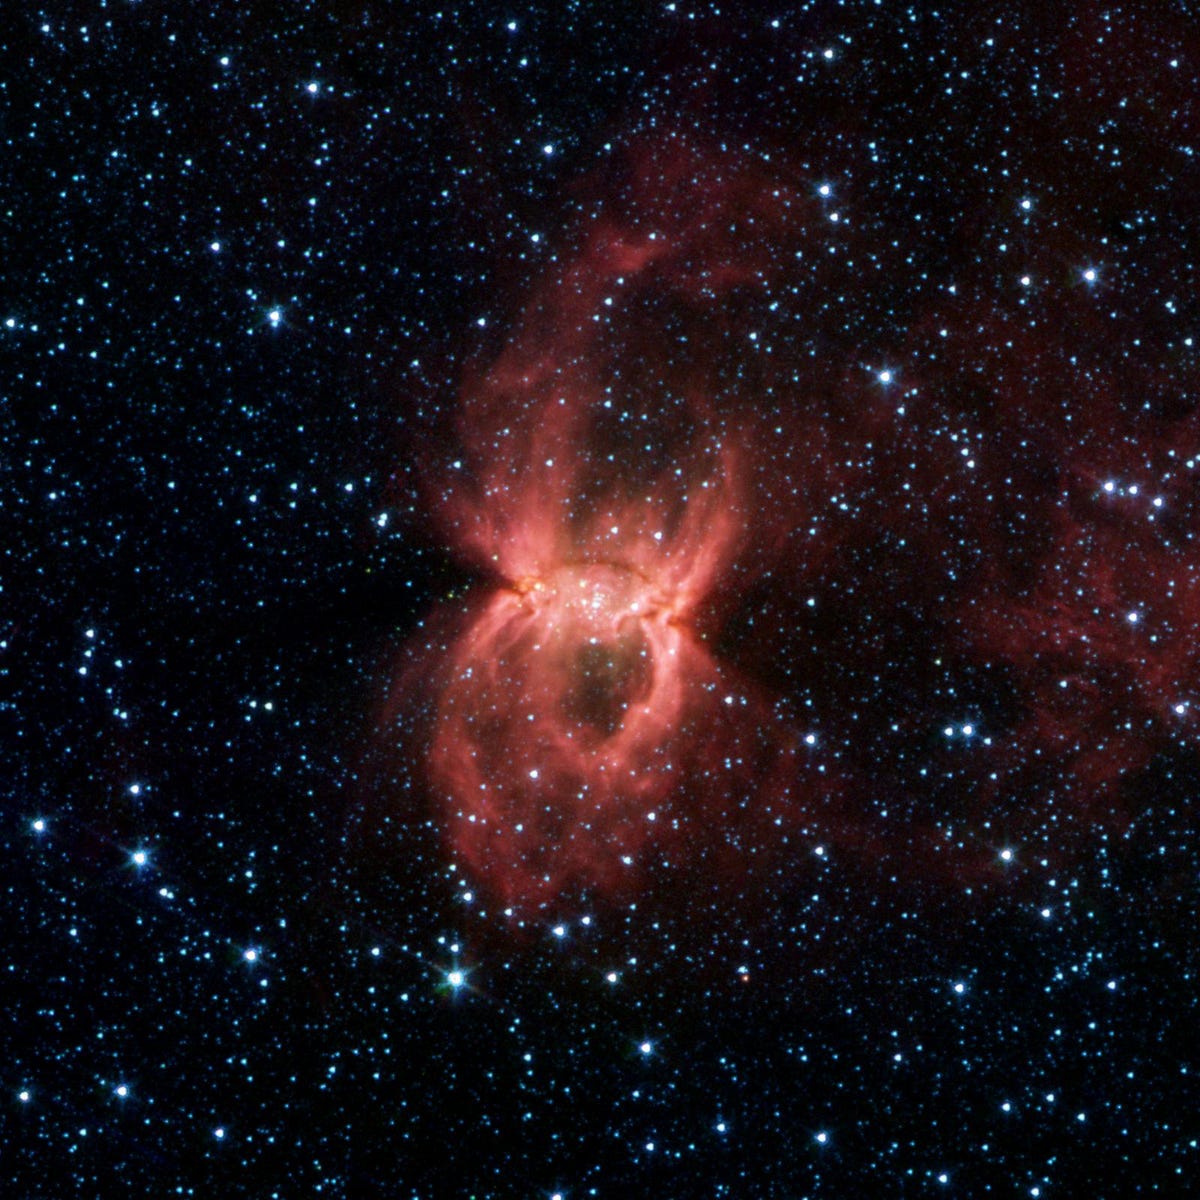 An orange-red nebula looks like a spider with legs extended like it's going to catch prey.